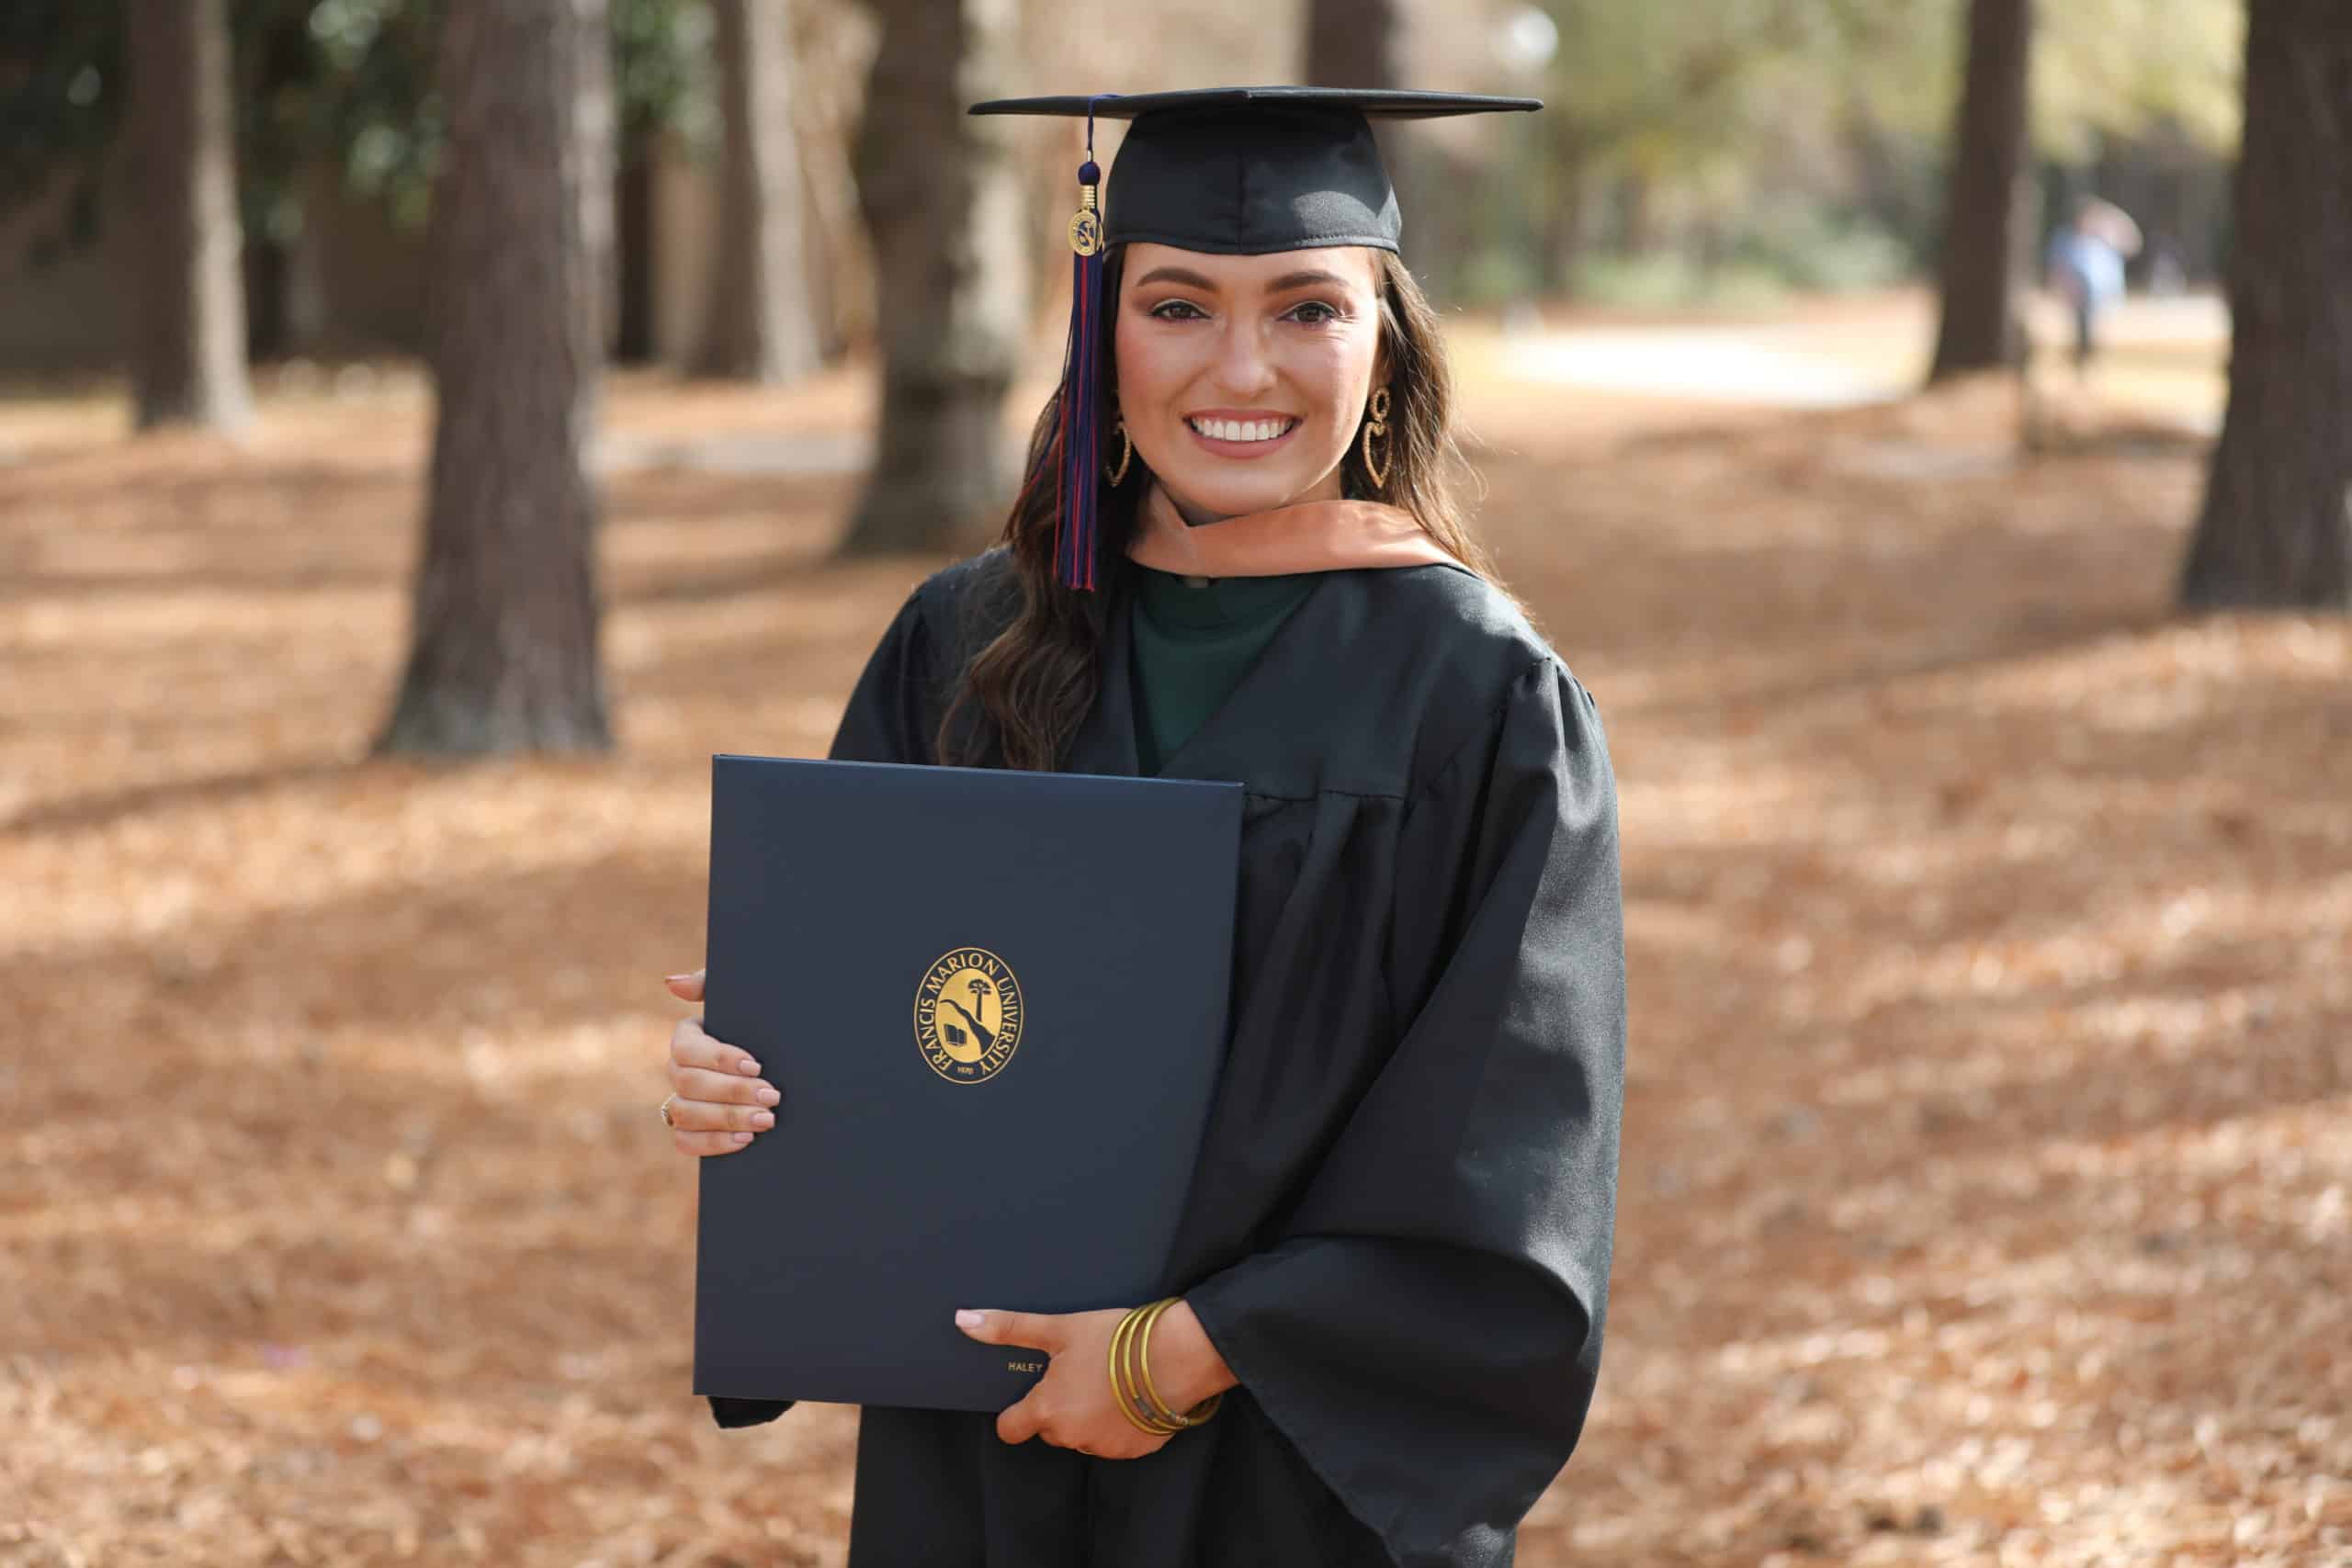 Haley Andersen graduates FMU with determination to succeed in a meaningful photography career